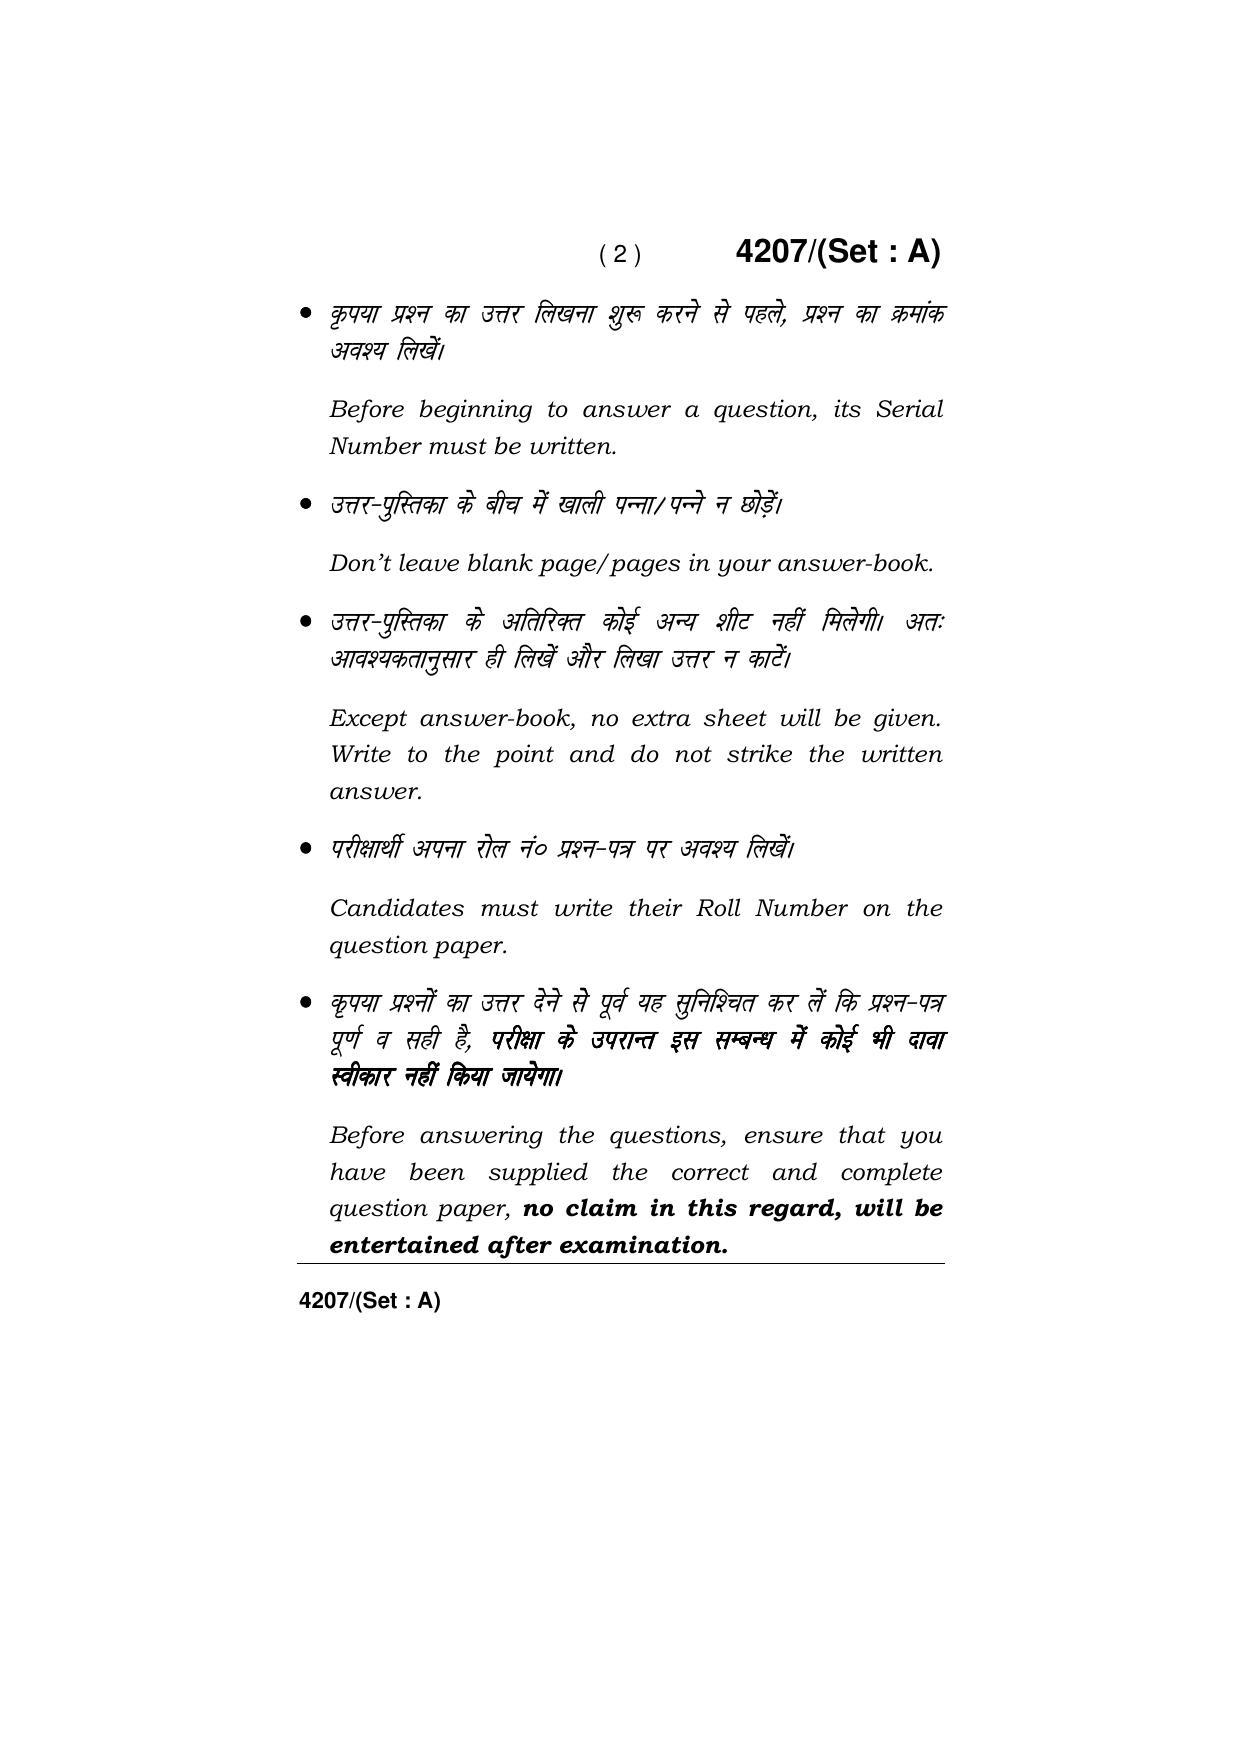 Haryana Board HBSE Class 10 Social Science (All Set) 2019 Question Paper - Page 2